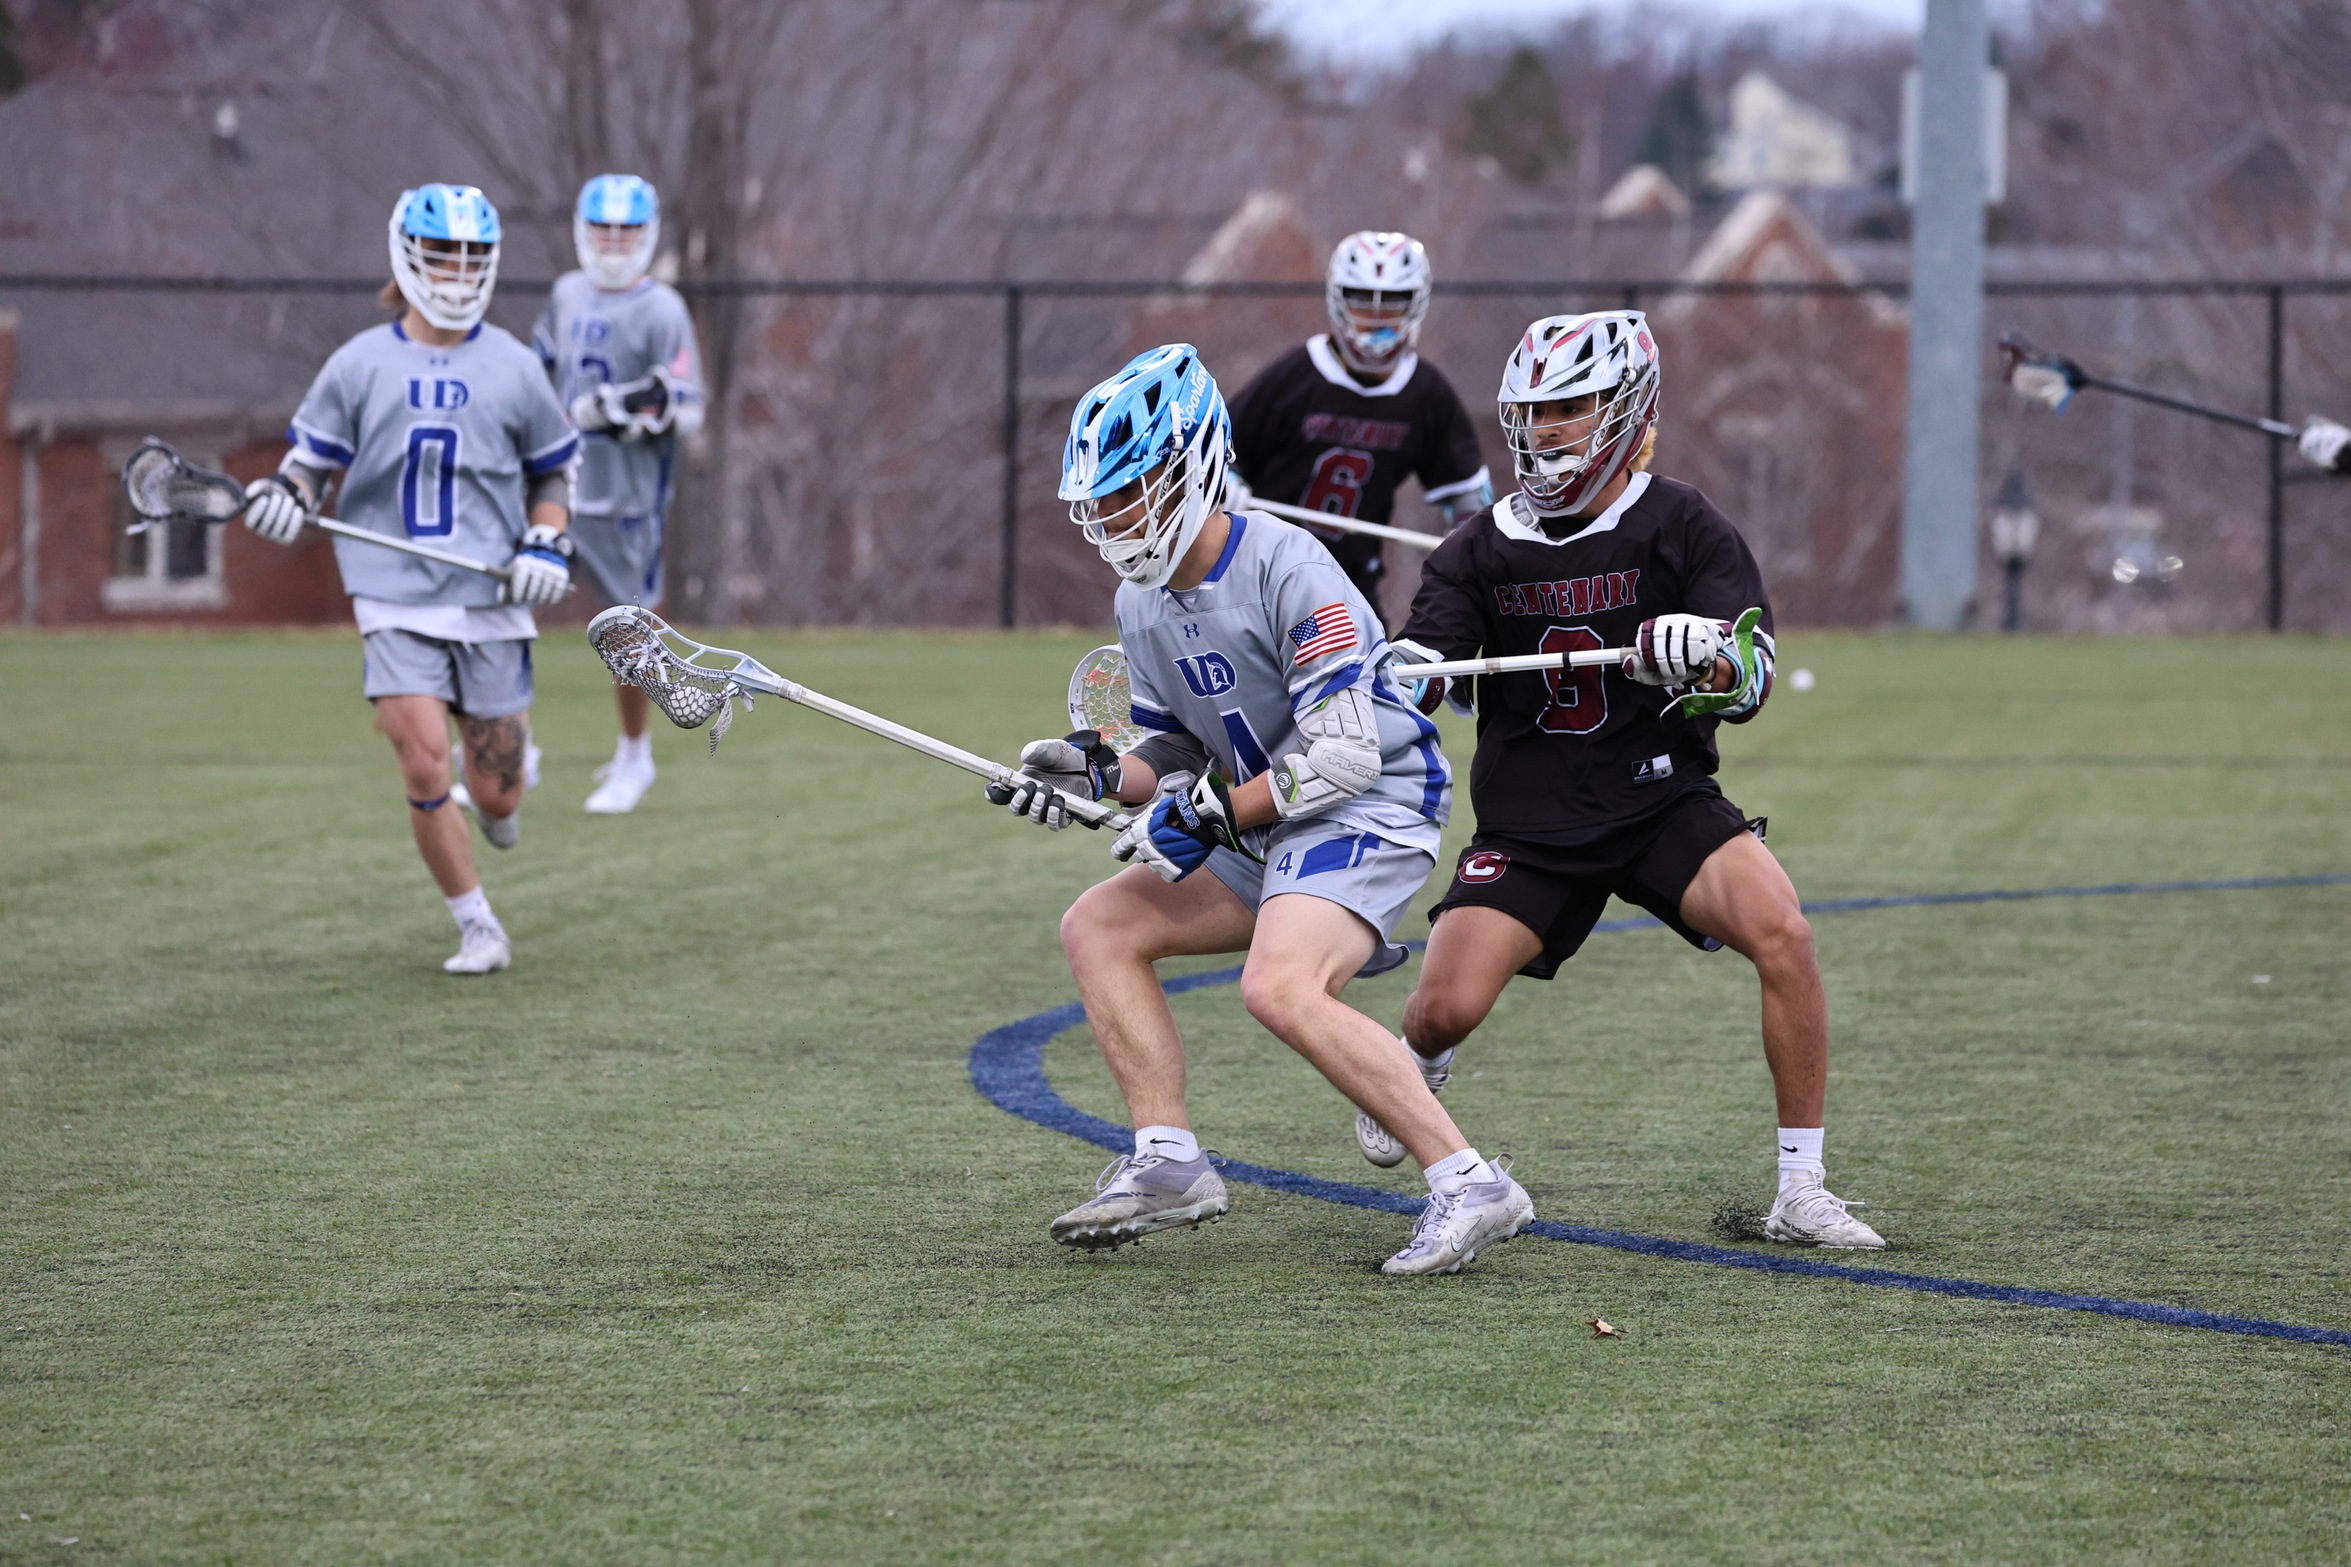 The Gents fell 9-8 at the buzzer on Saturday at Beloit.